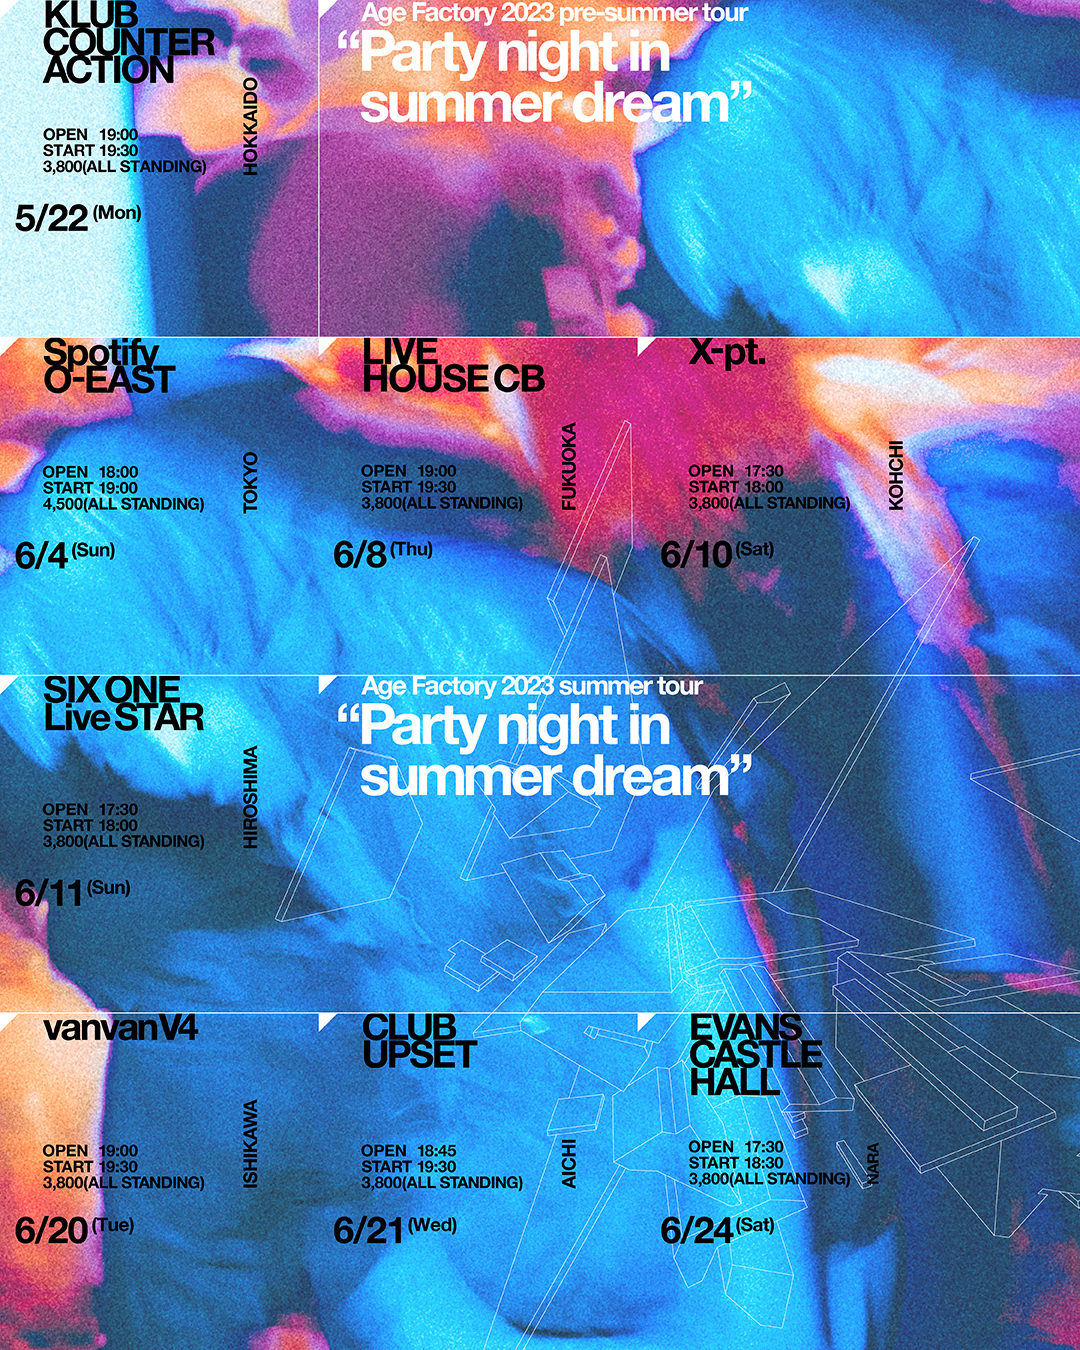 Age Factory 2023 pre-summer tour "Party night in summer dream"